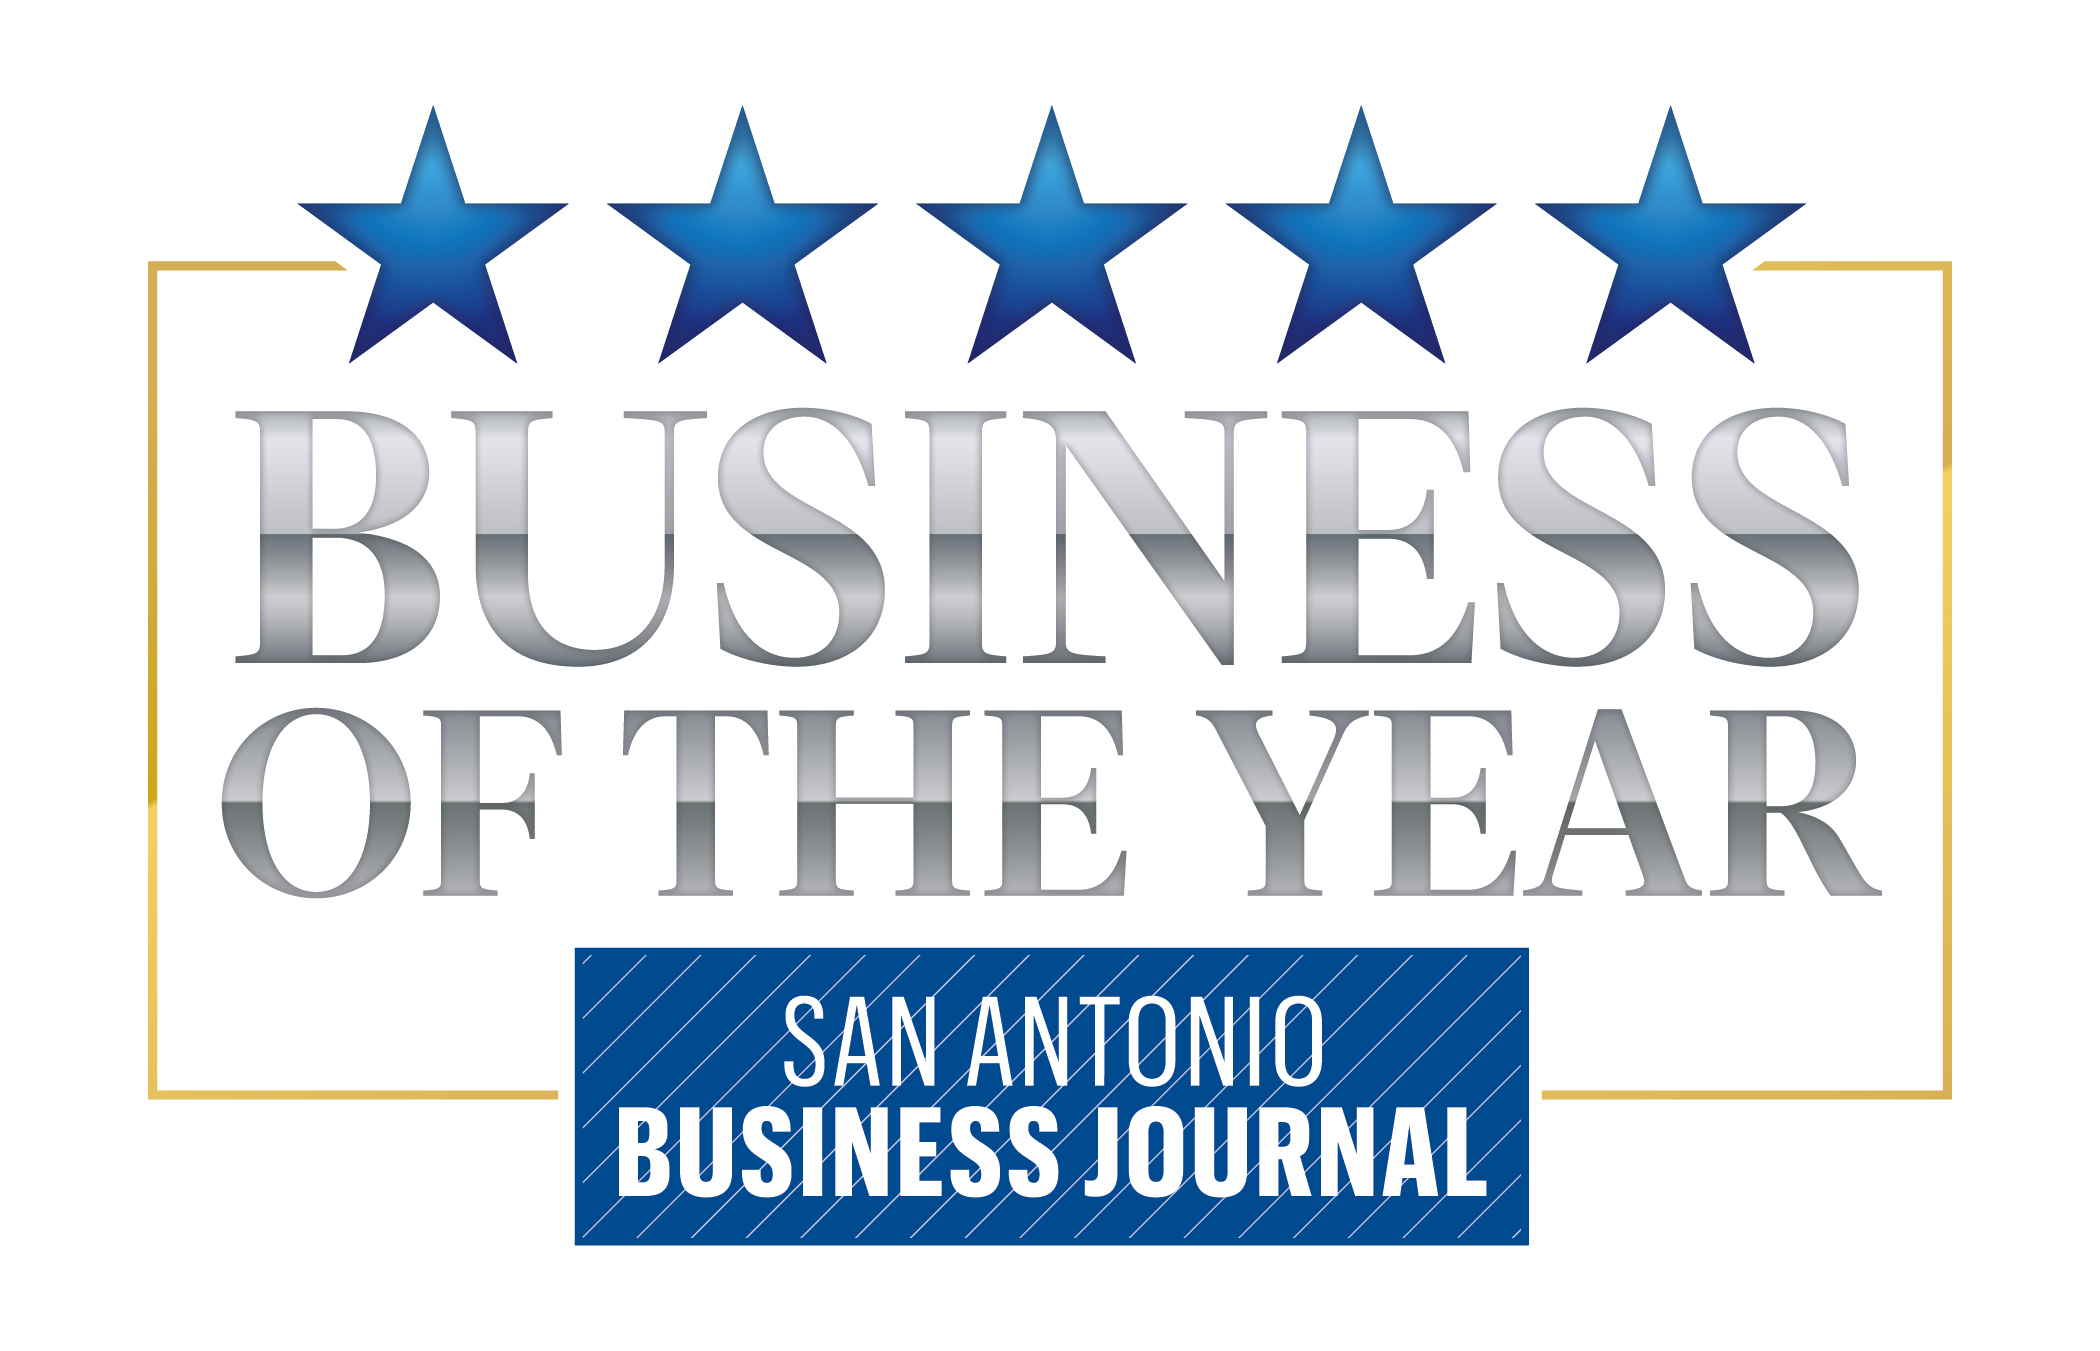 San Antonio Business Journal - Business of the Year logo